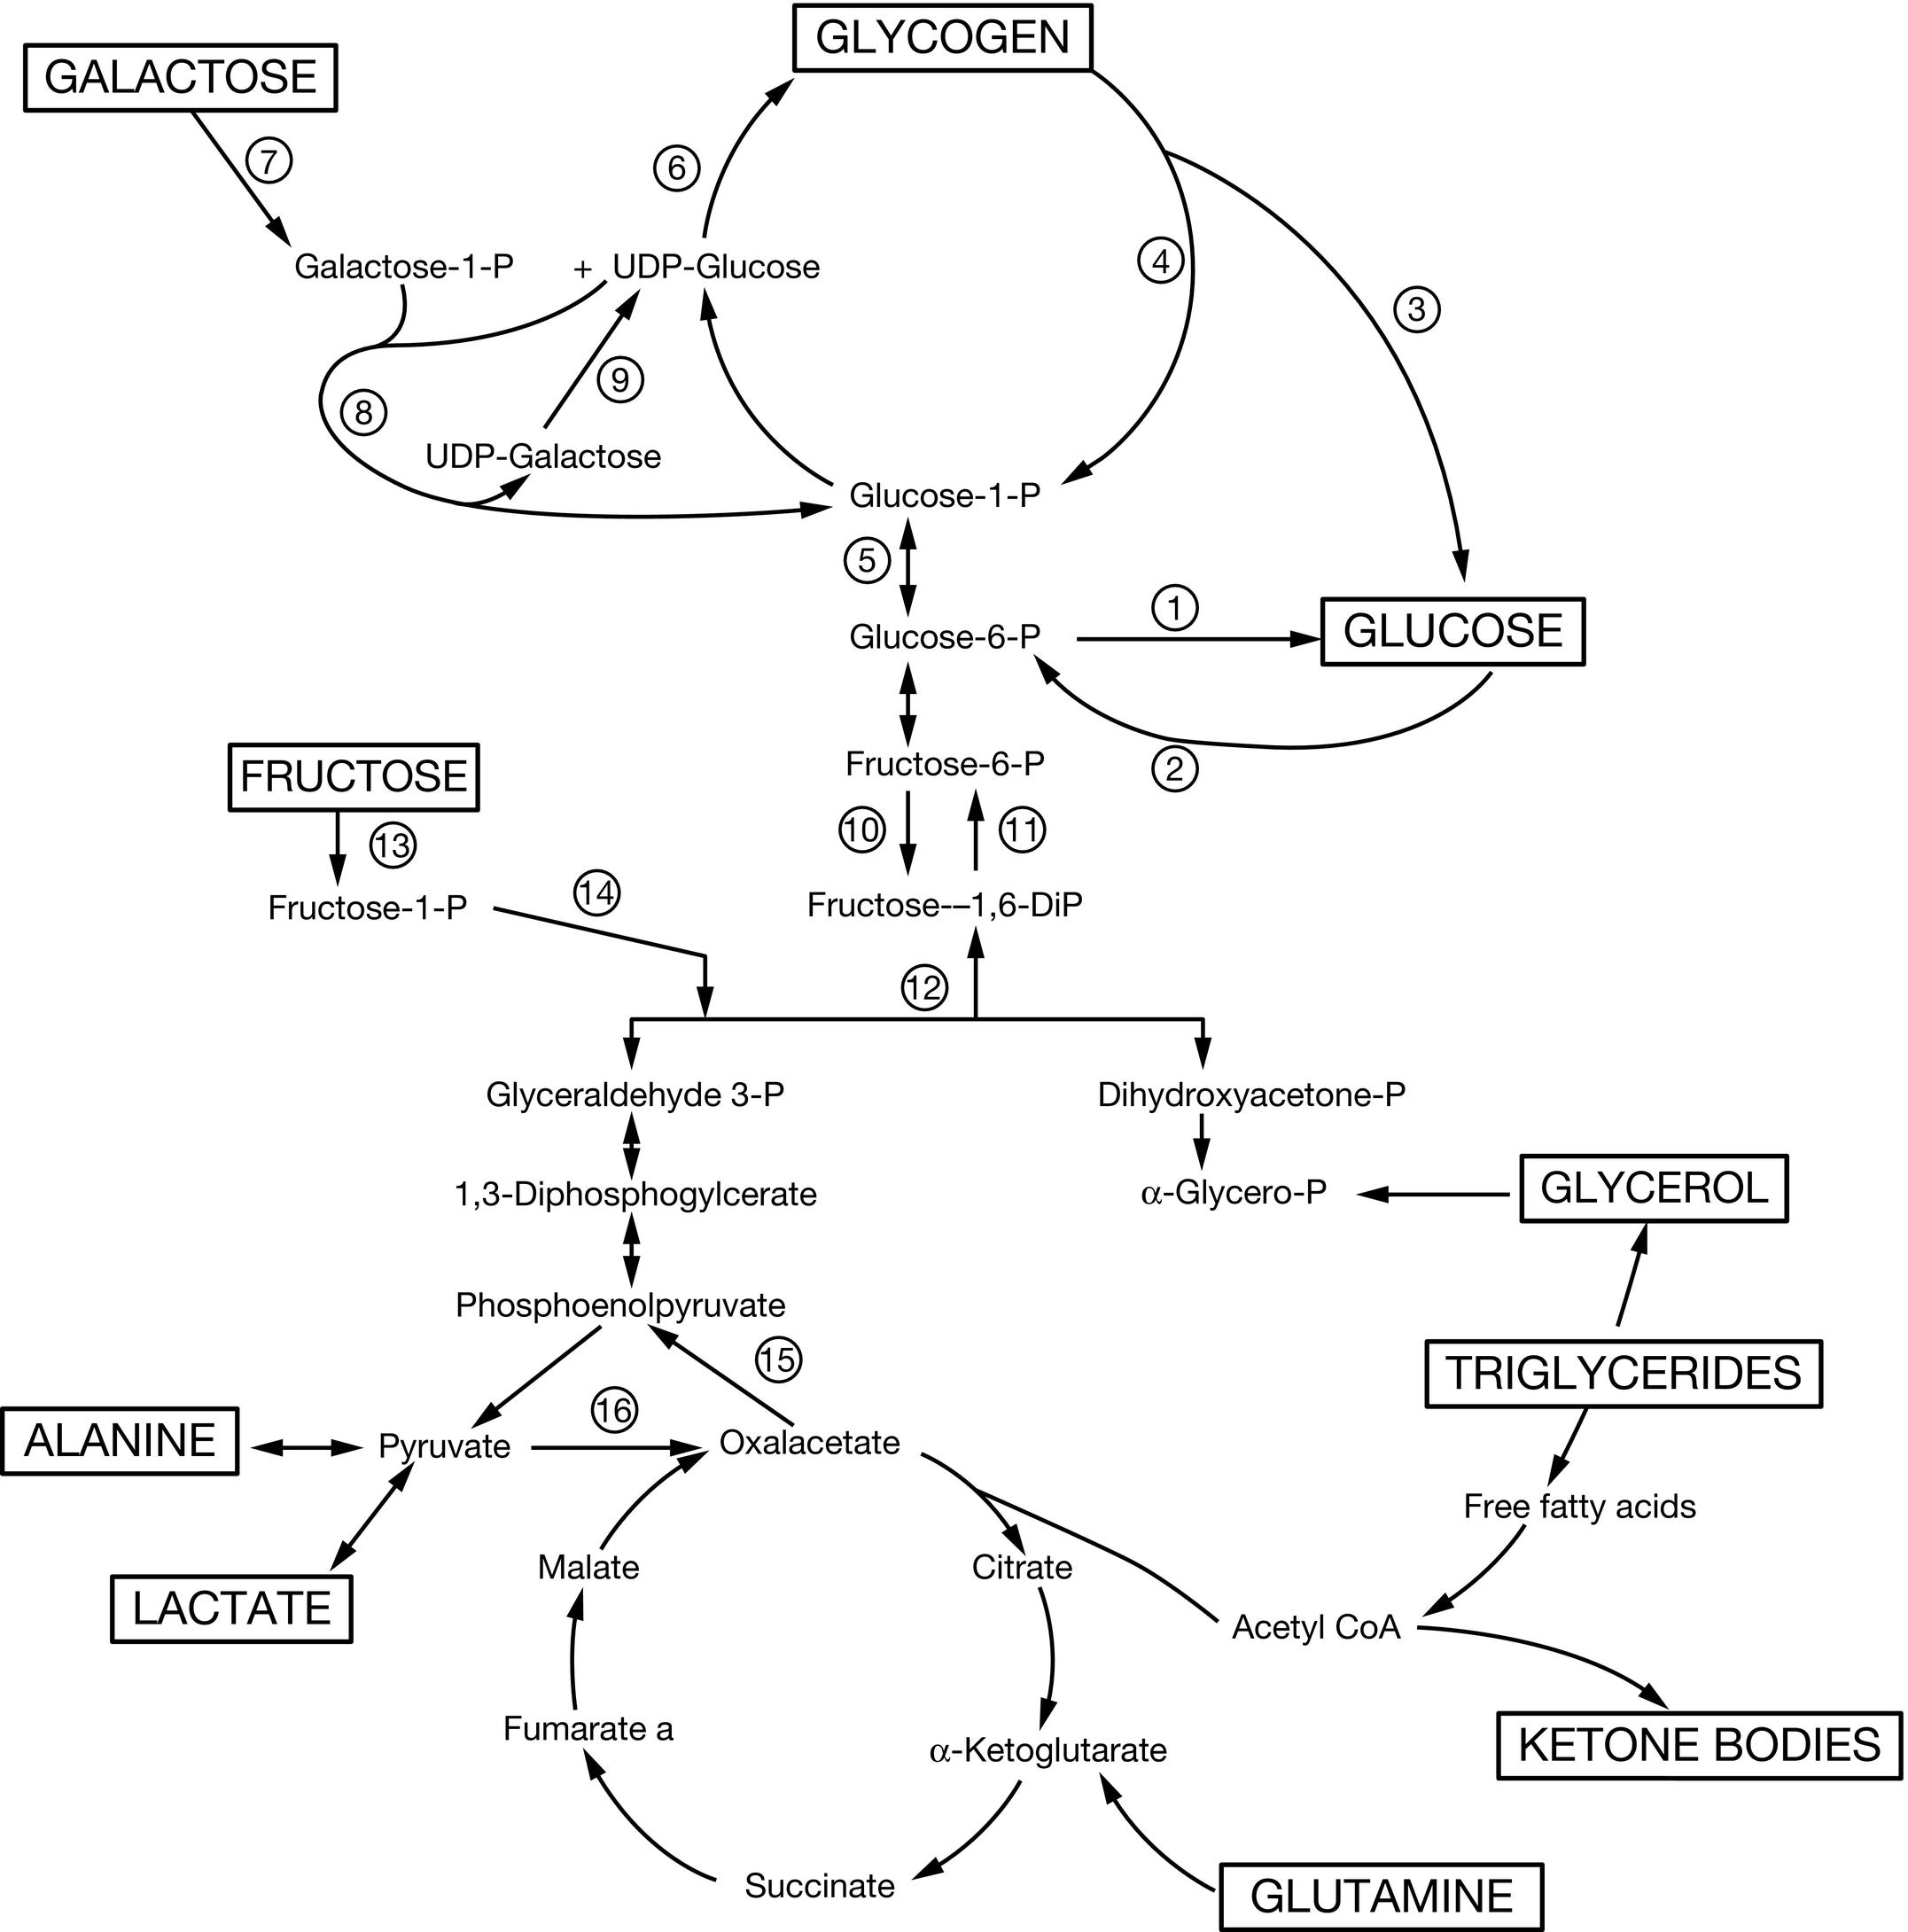 Fig. 23.5, Key metabolic pathways of intermediary metabolism. Disruption of the elements of these pathways may be pathogenetic in the development of hypoglycemia. Not shown is the hormonal control of these pathways. Indicated are: (1) glucose 6-phosphatase, (2) glucokinase, (3) amylo-1,6-glucosidase, (4) phosphorylase, (5) phosphoglucomutase, (6) glycogen synthetase, (7) galactokinase, (8) galactose 1-phosphate uridyl transferase, (9) uridine diphosphogalactose-4-epimerase, (10) phosphofructokinase, (11) fructose 1,6- diphosphatase, (12) fructose 1,6-diphosphate aldolase, (13) fructokinase, (14) fructose 1-phosphate aldolase, (15) phosphoenolpyruvate carboxykinase, and (16) pyruvate carboxylase. UDP , Uridine diphosphate.